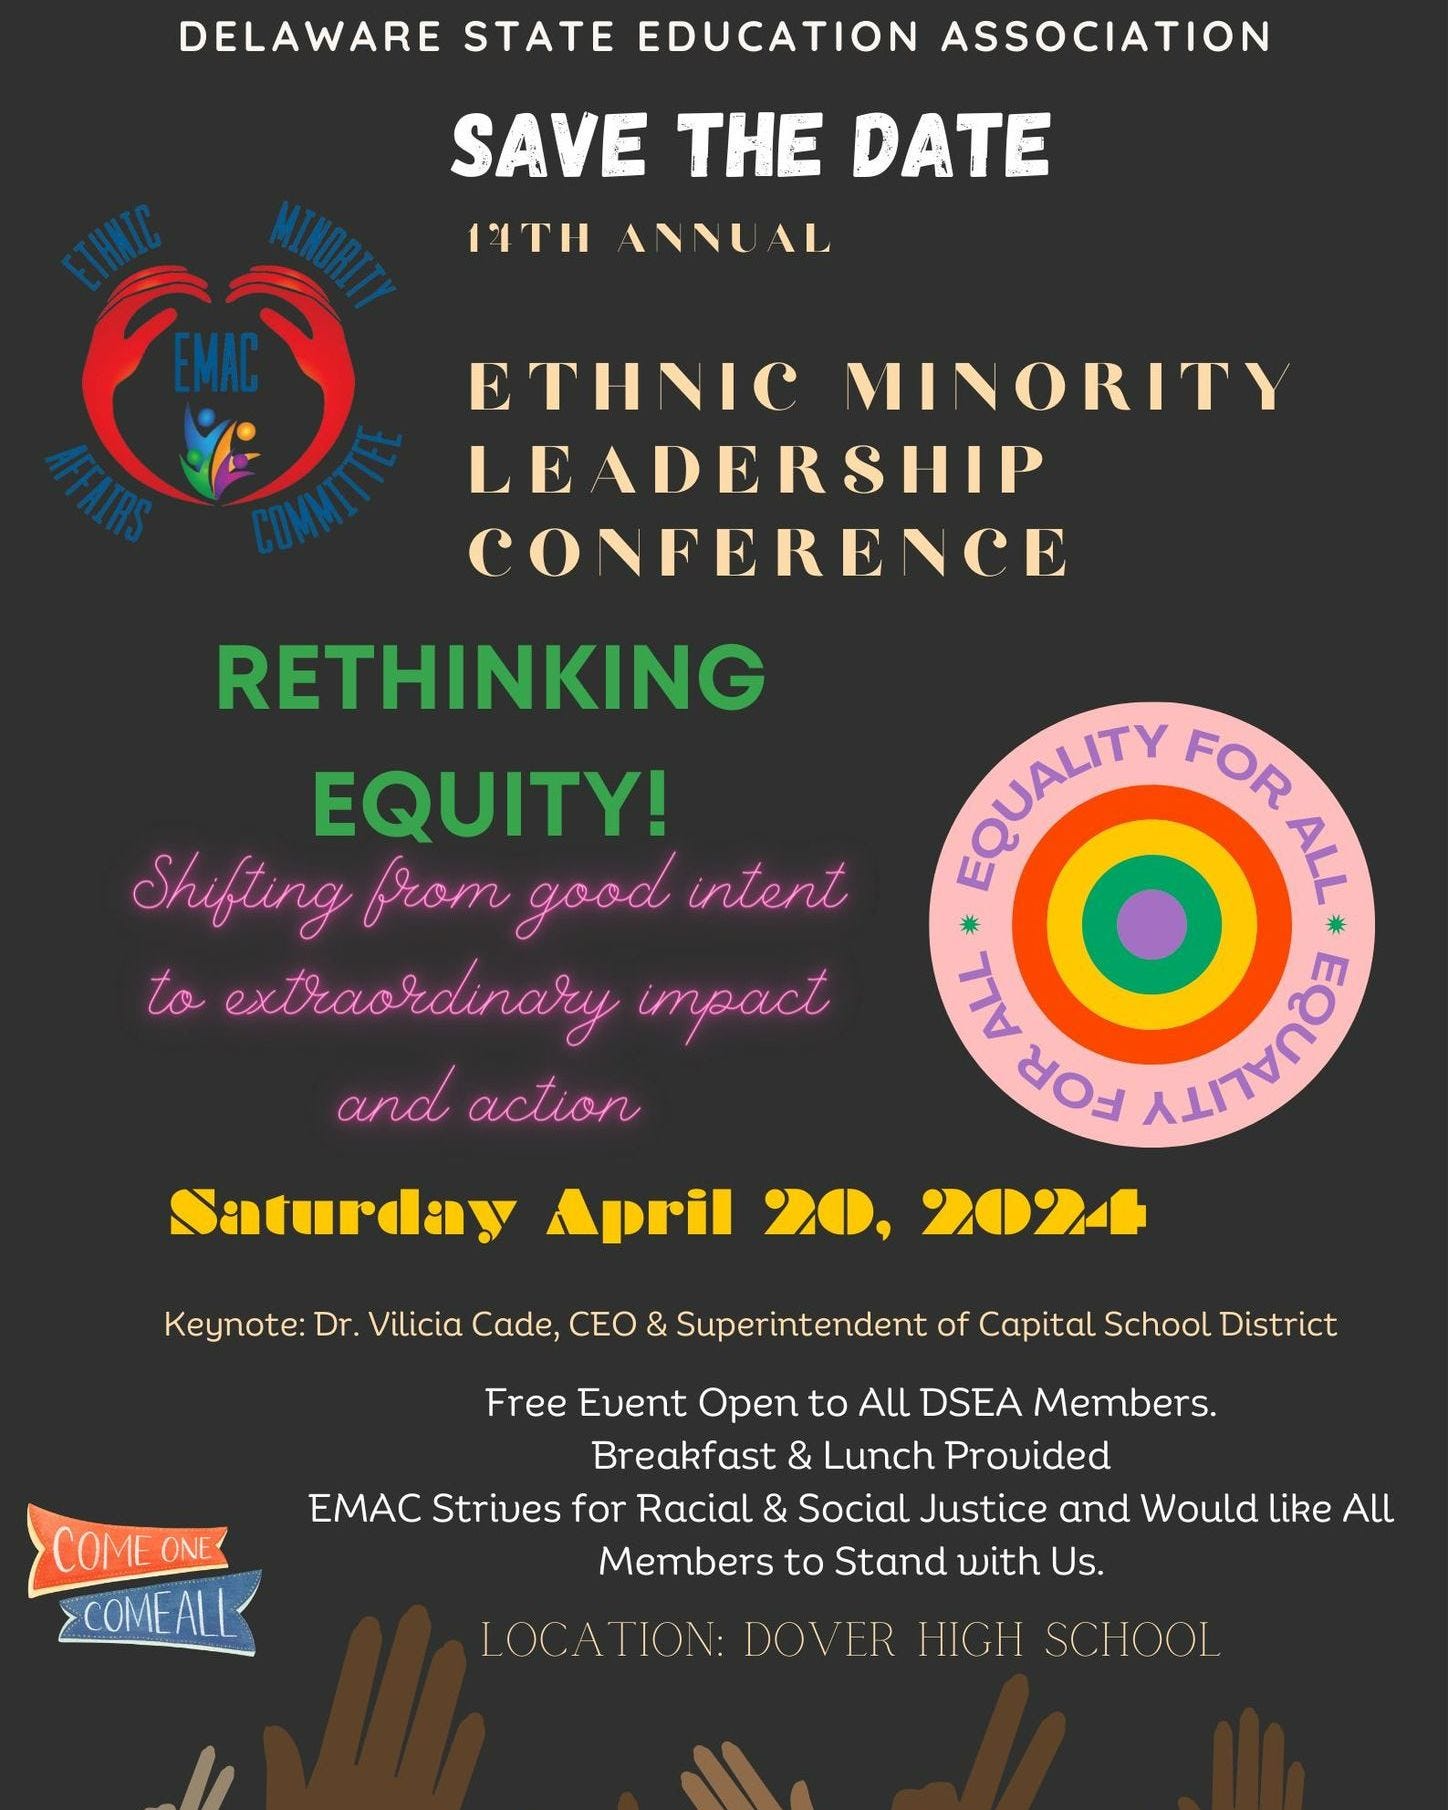 May be an image of text that says 'DELAWARE STATE EDUCATION ASSOCIATION SAVE THE DATE 14TH ANNU AL ETHNIC MINORITY LE ADERSHIP CONFERENCE RETHINKING EQUITY! Shifting from good intent to extraordinary impact and action SQUALITY FOR ALL * TAA HãE O Αuπνηόs Saturday April 20, 202- Keynote: Dr. Vilicia Cade, CEO & Superintendent of Capital School District COME ONE COMEALL Free Event Open to All DSEA Members. Breakfast & Lunch Provided EMAC Strives for Racial & Social Justice and Would like All Members to Stand with Us. DOVER HIGH SCHOOL'